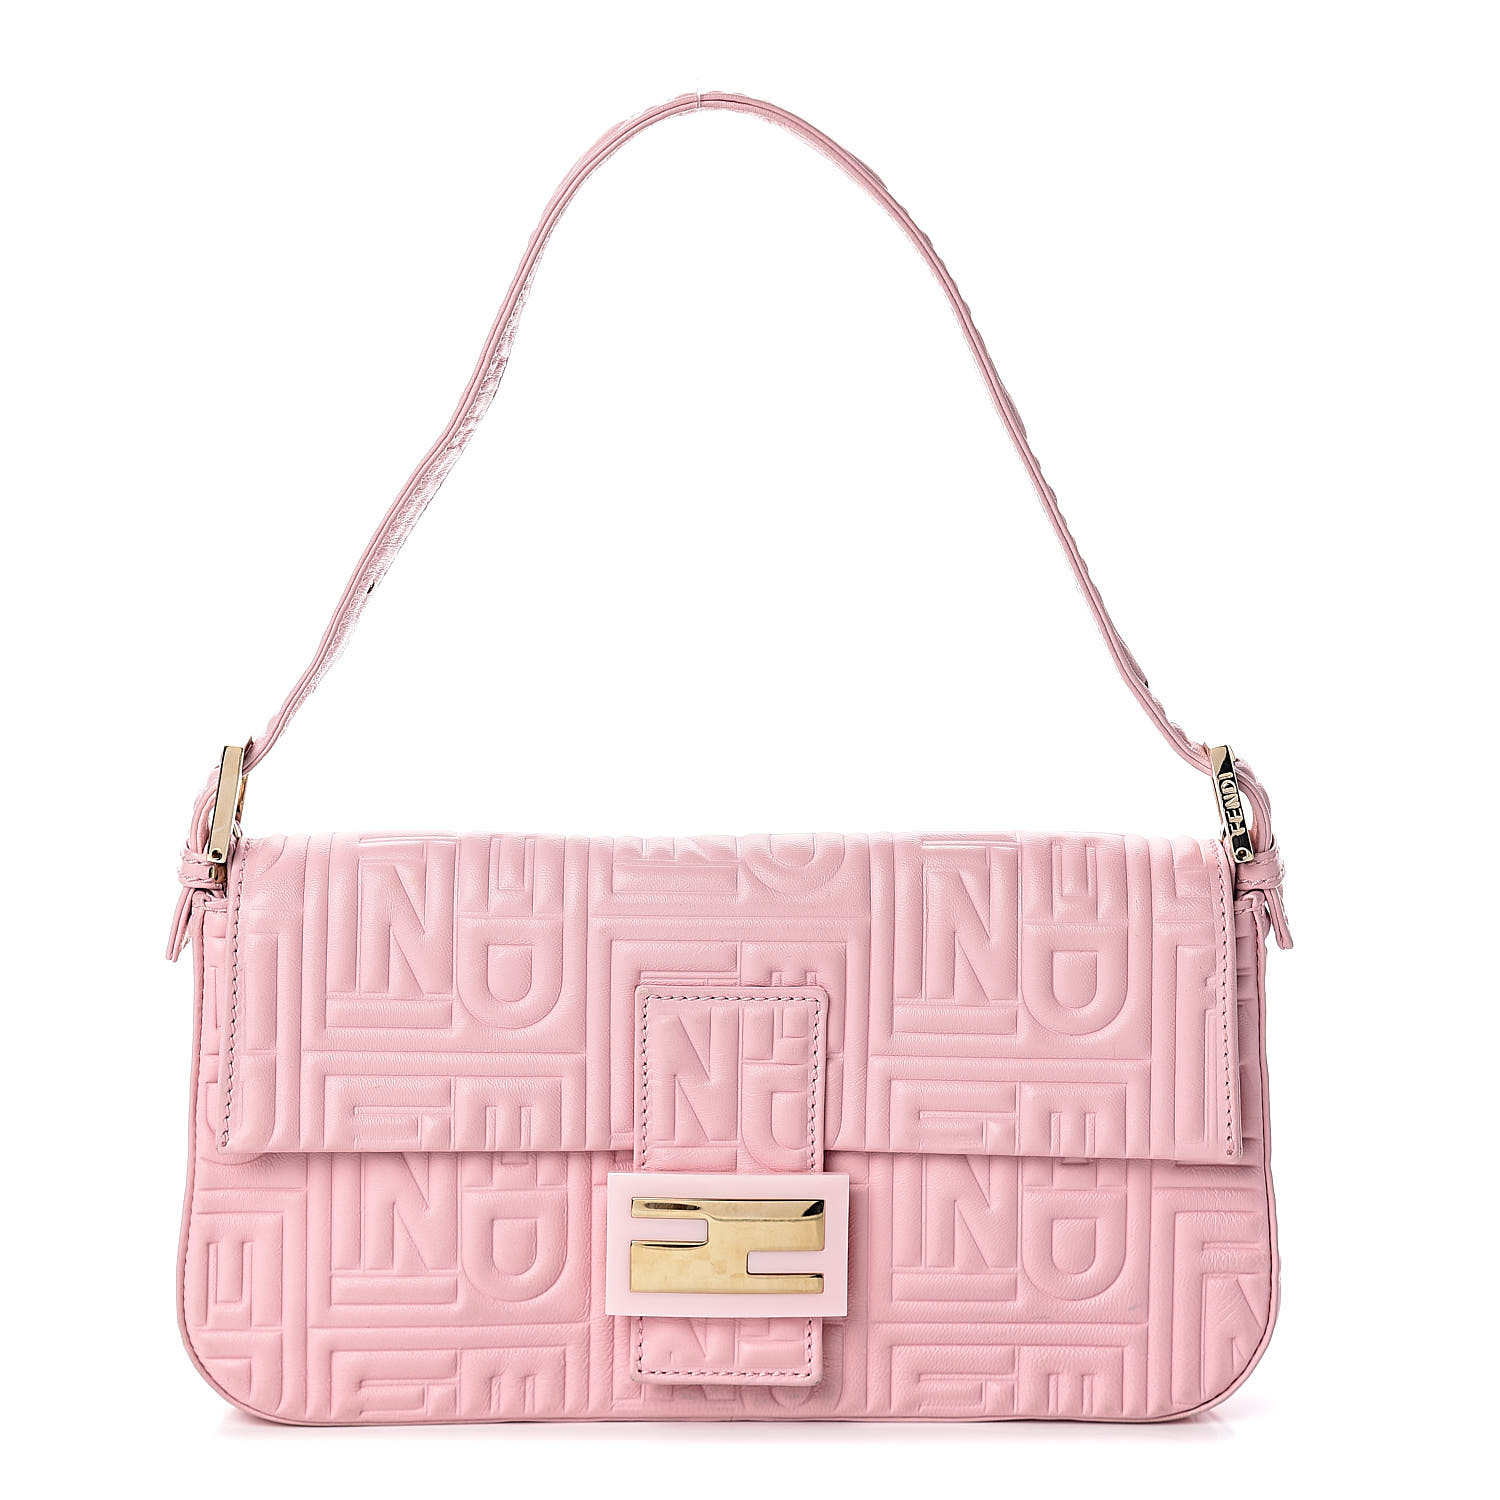 Baguette - Pink nappa leather bag